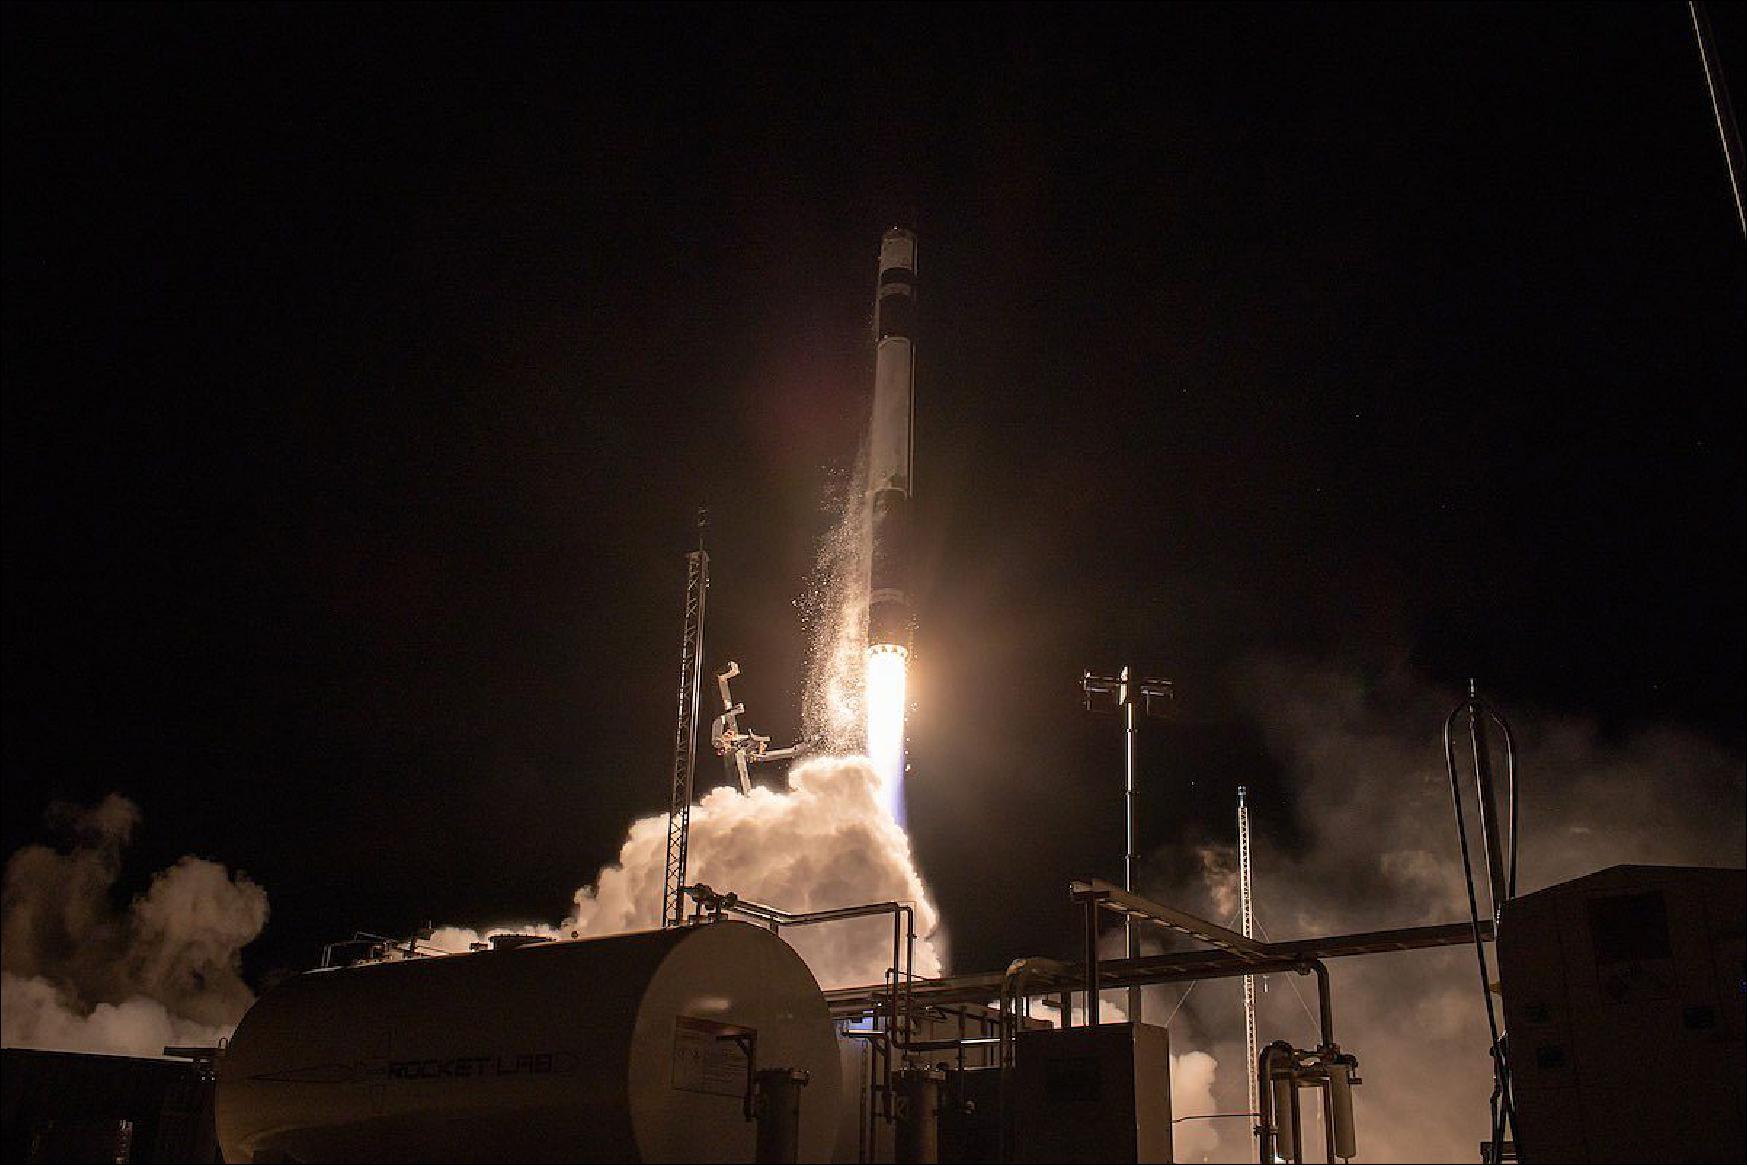 Figure 9: A Rocket Lab Electron launcher takes off from Launch Complex 1 on Mahia Peninsula, New Zealand on 15 December 2020 (image credit: Rocket Lab)